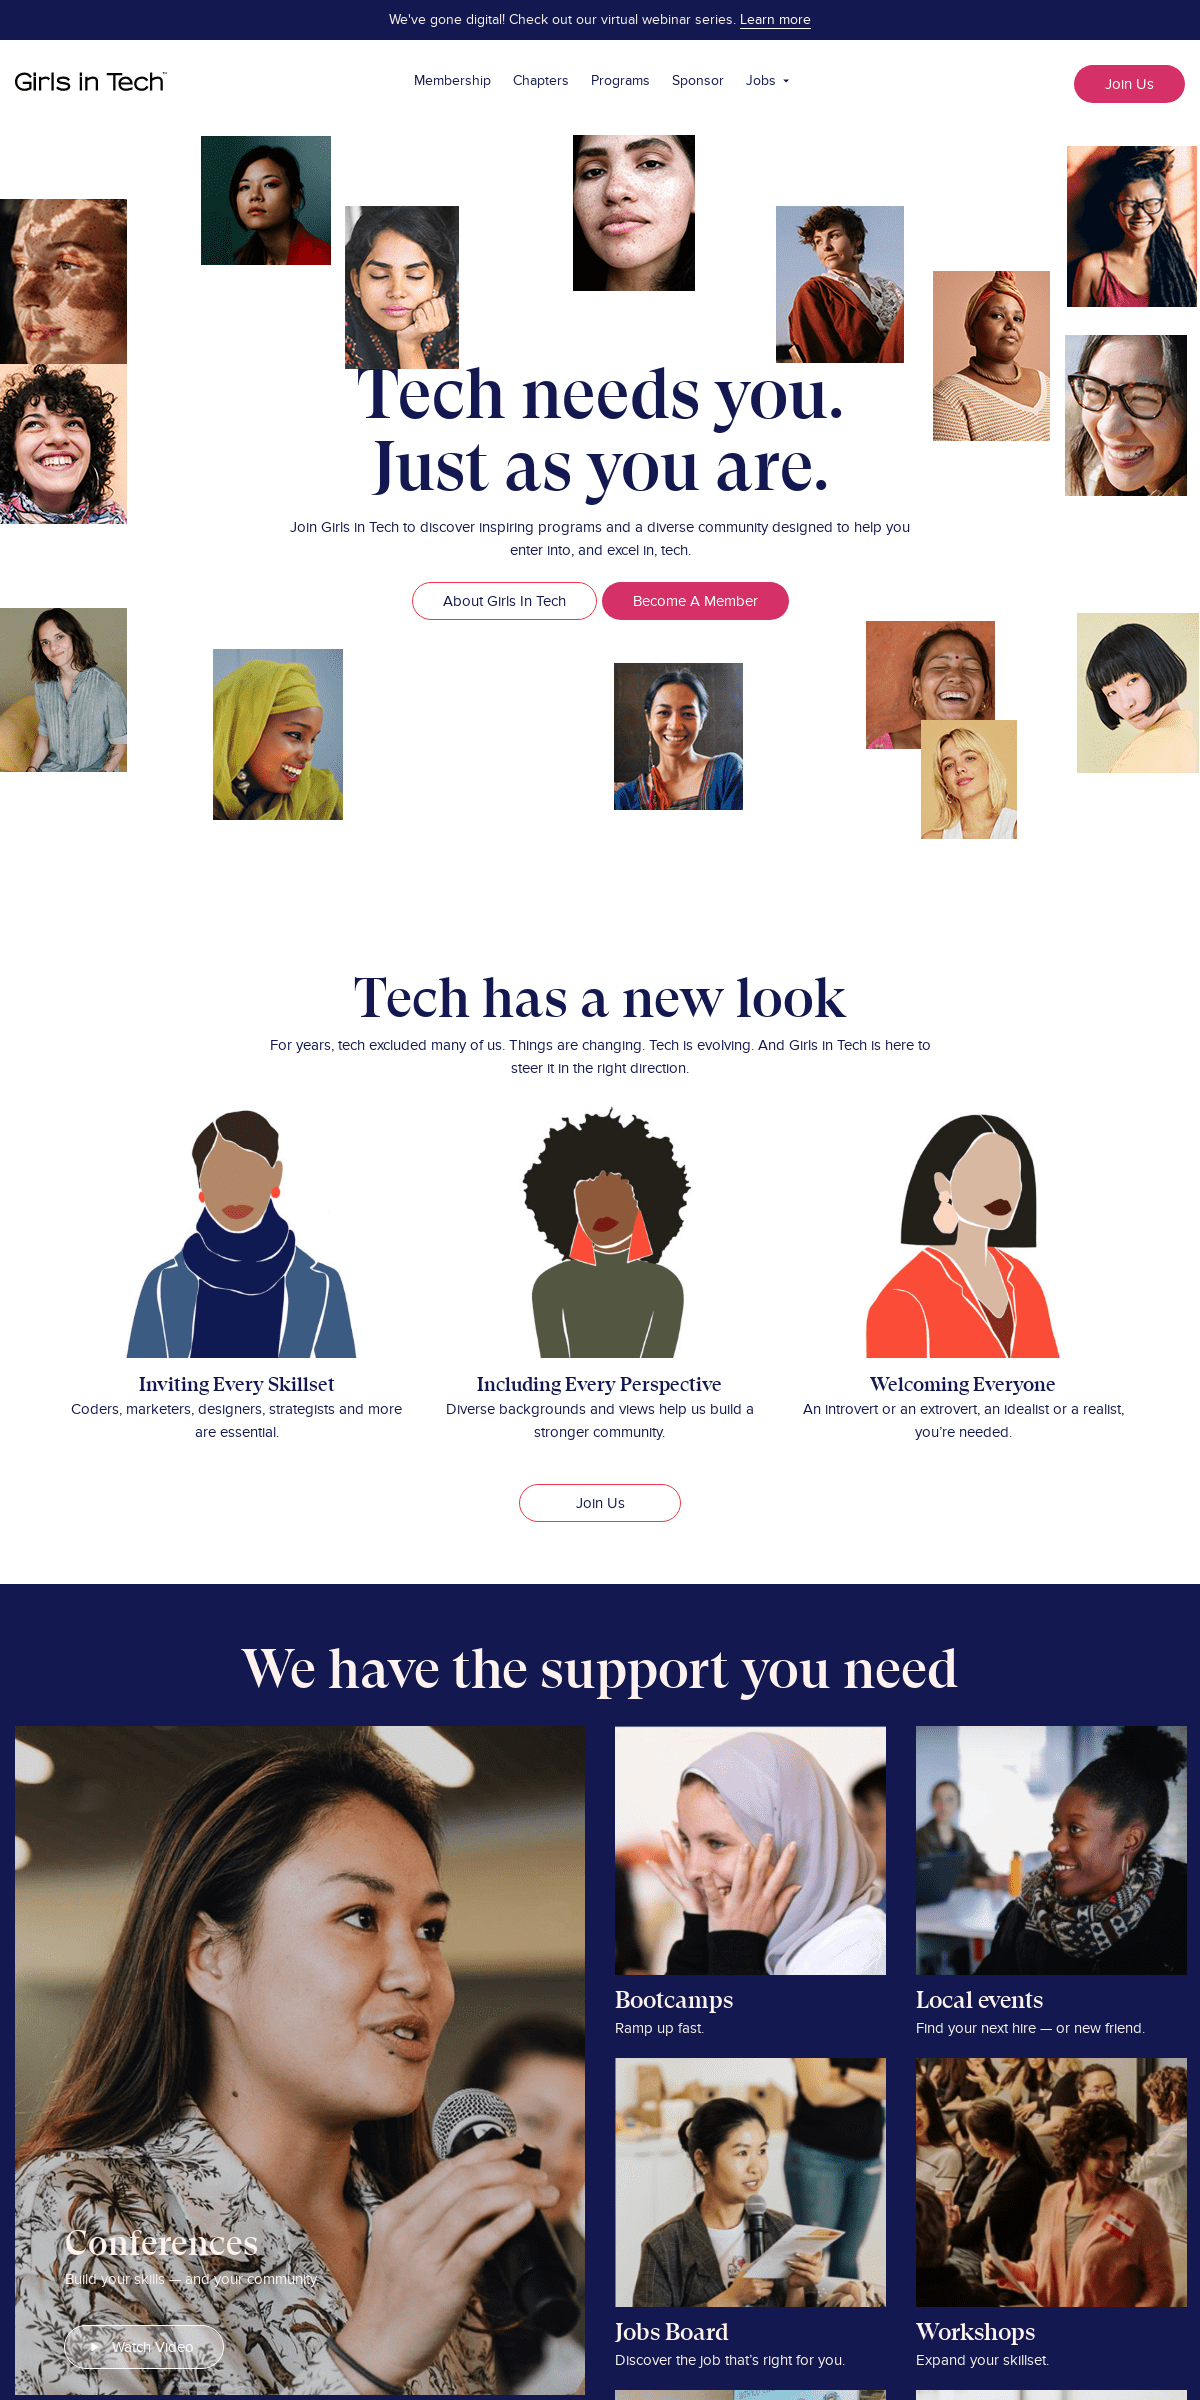 A complete backup of girlsintech.org